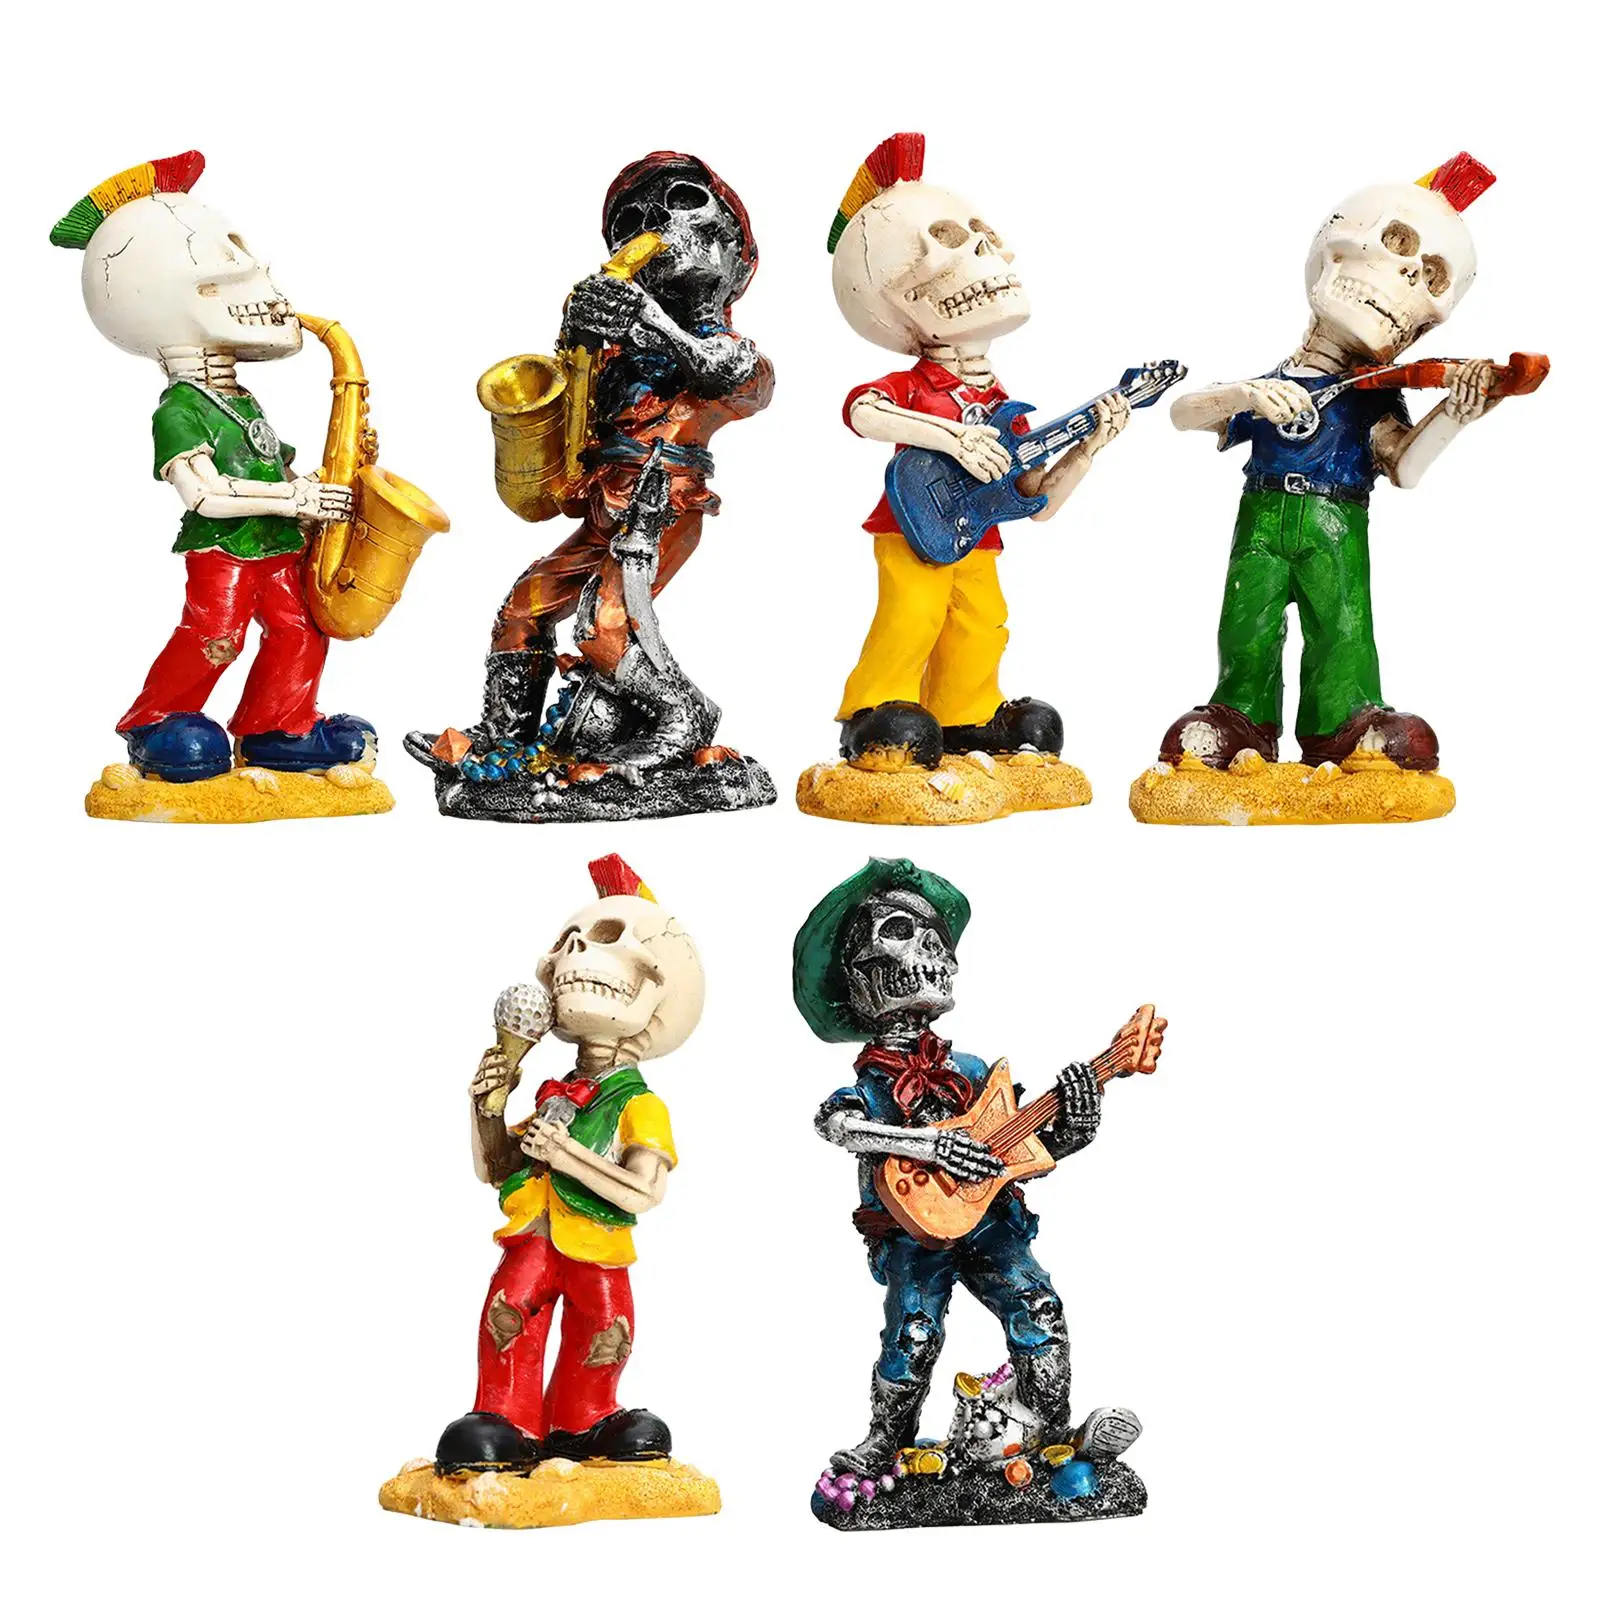 Collectible Musician Figurines Band Figurine Skeleton Statue for Home Office